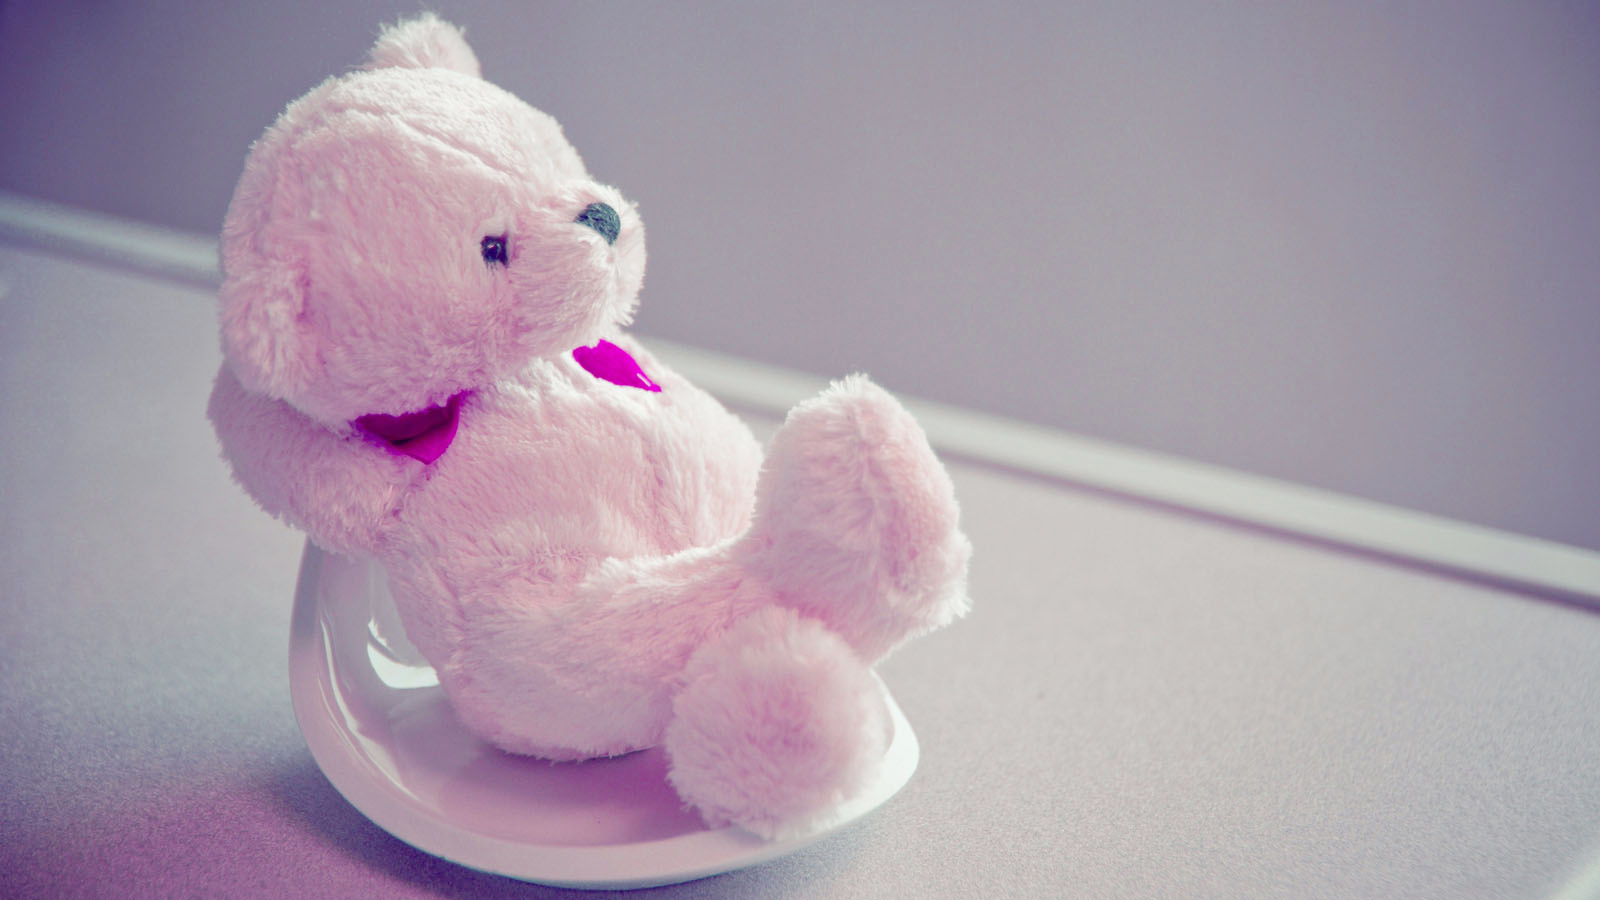 awesome wallpaper of pink teddy bear